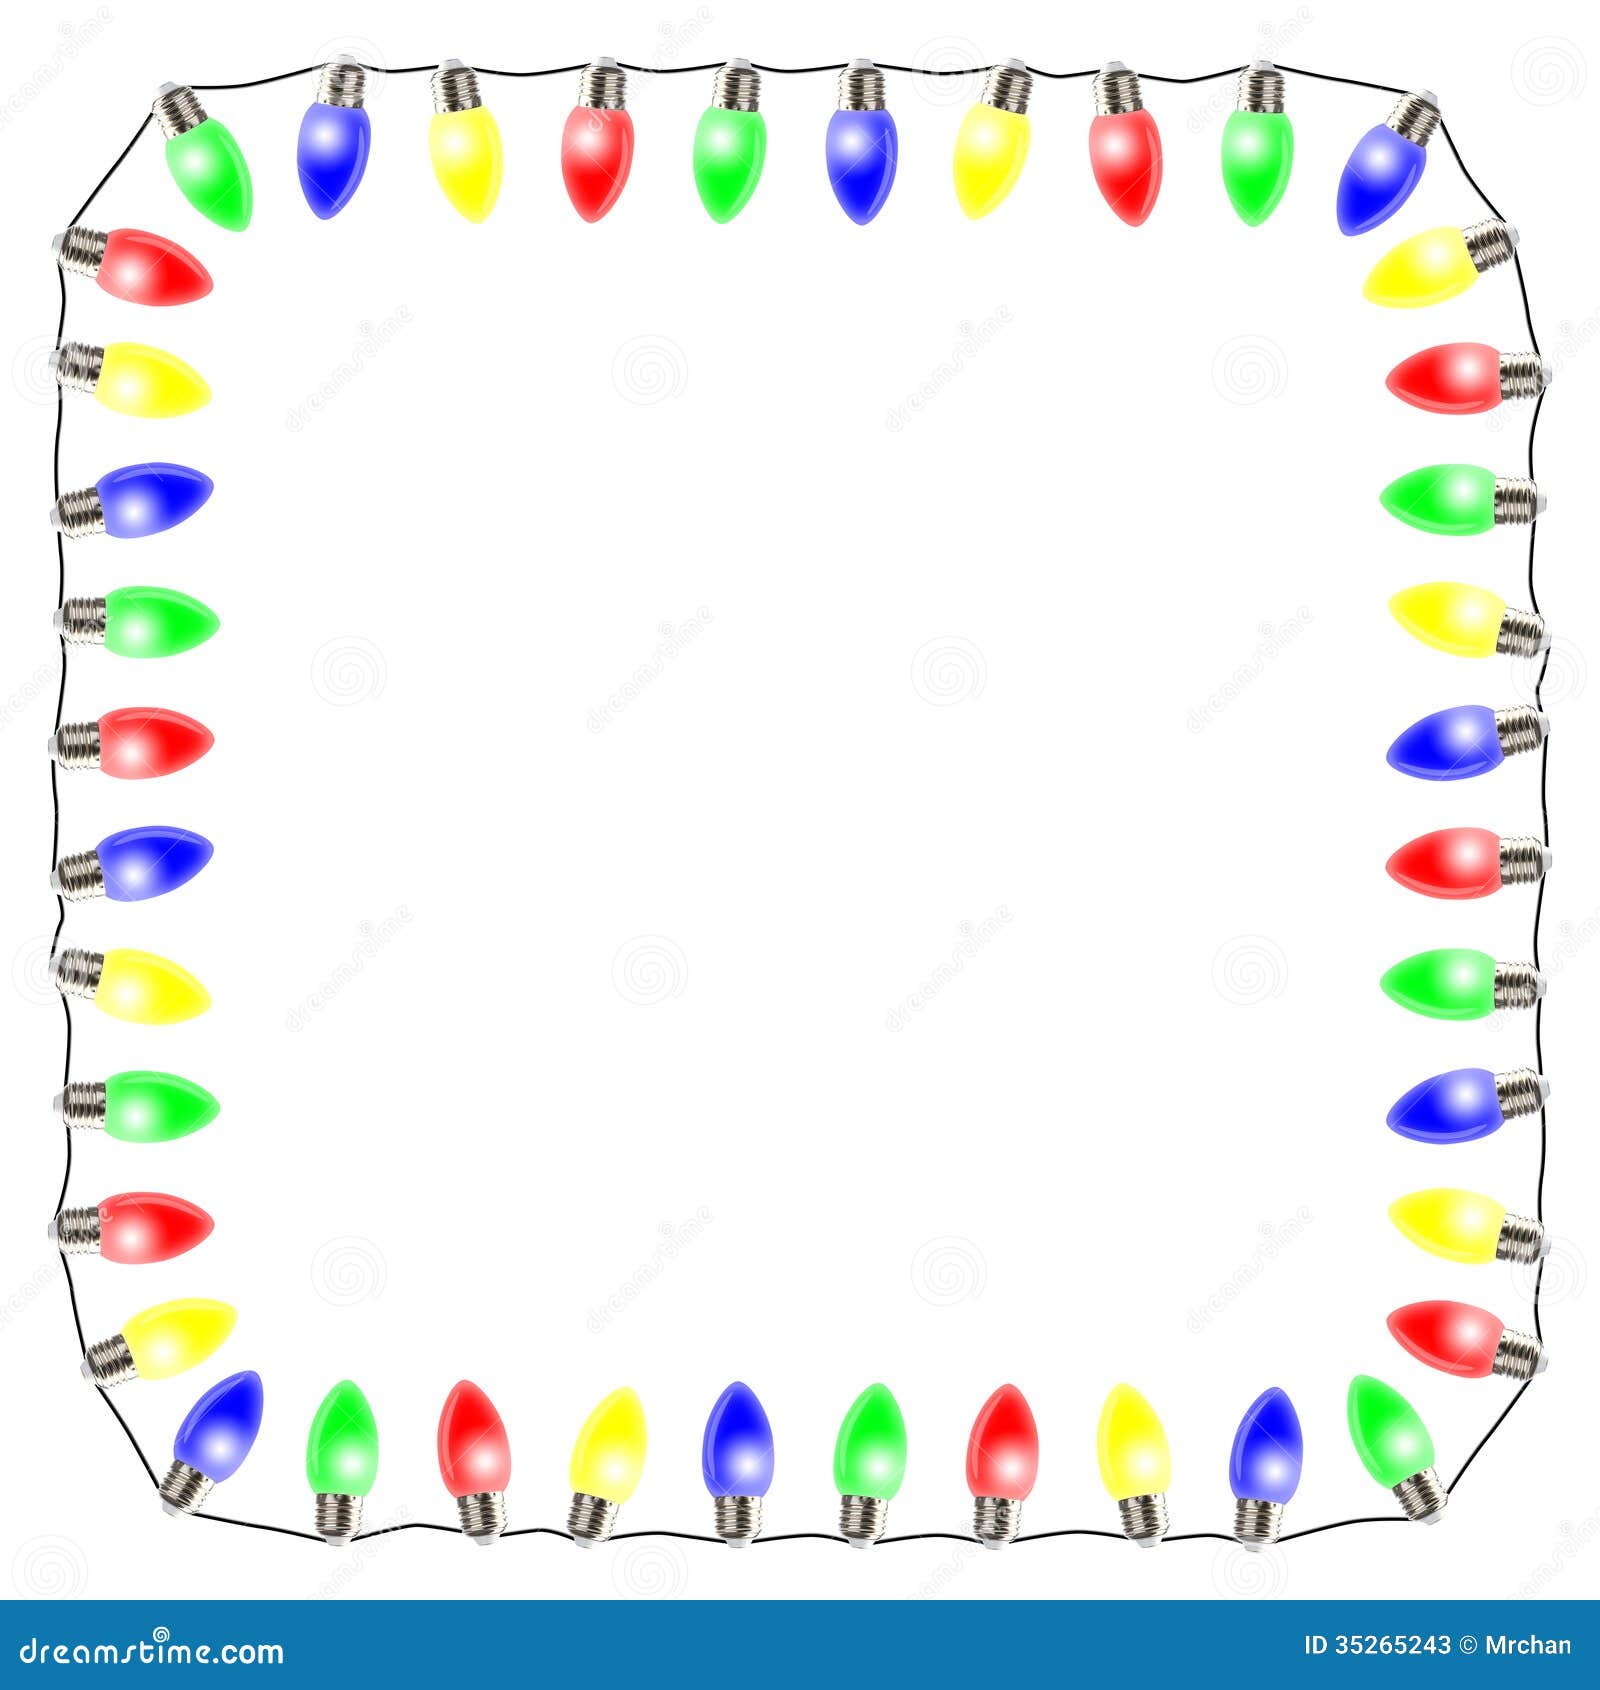 Colorful christmas holiday lights frame with a white background. You ...